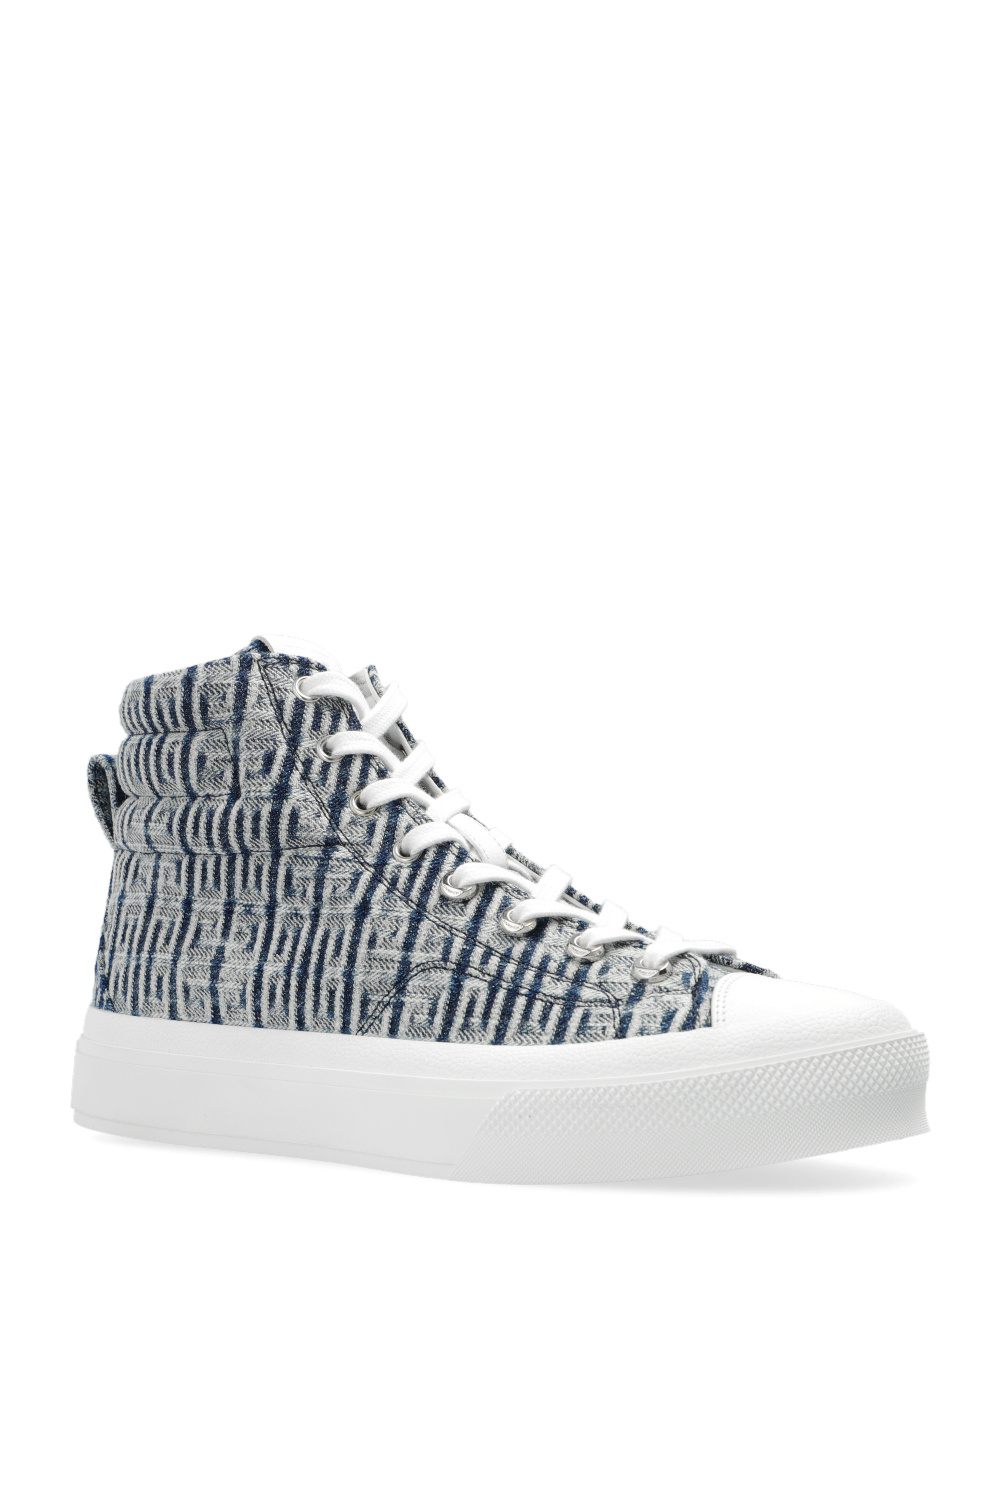 givenchy WEDGE ‘City’ high-top sneakers